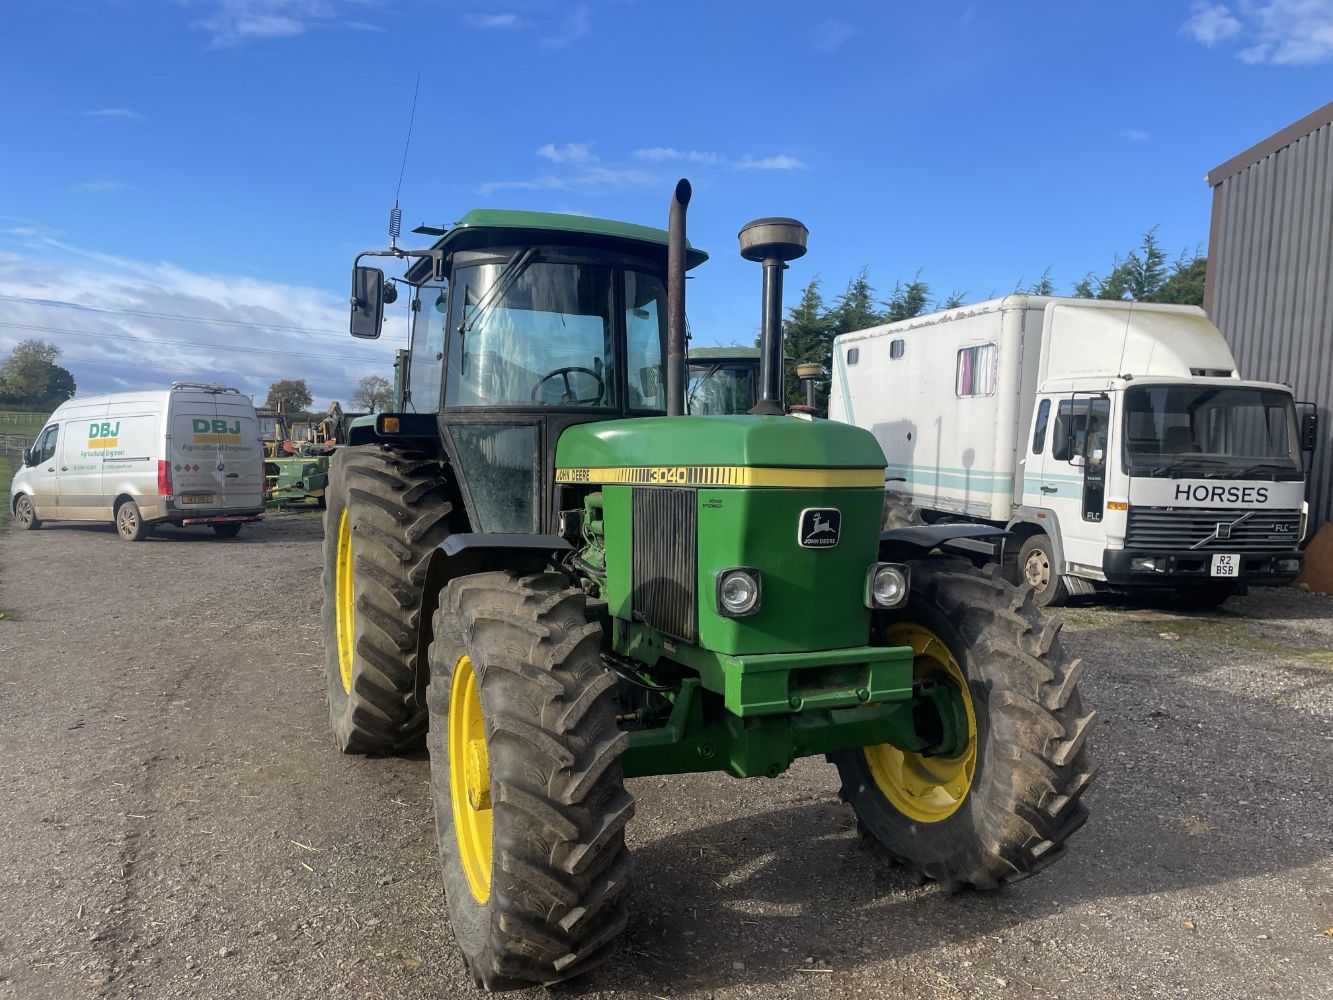 NOVEMBER COLLECTIVE MACHINERY, PLANT, FODDER & VEHICLE SALE